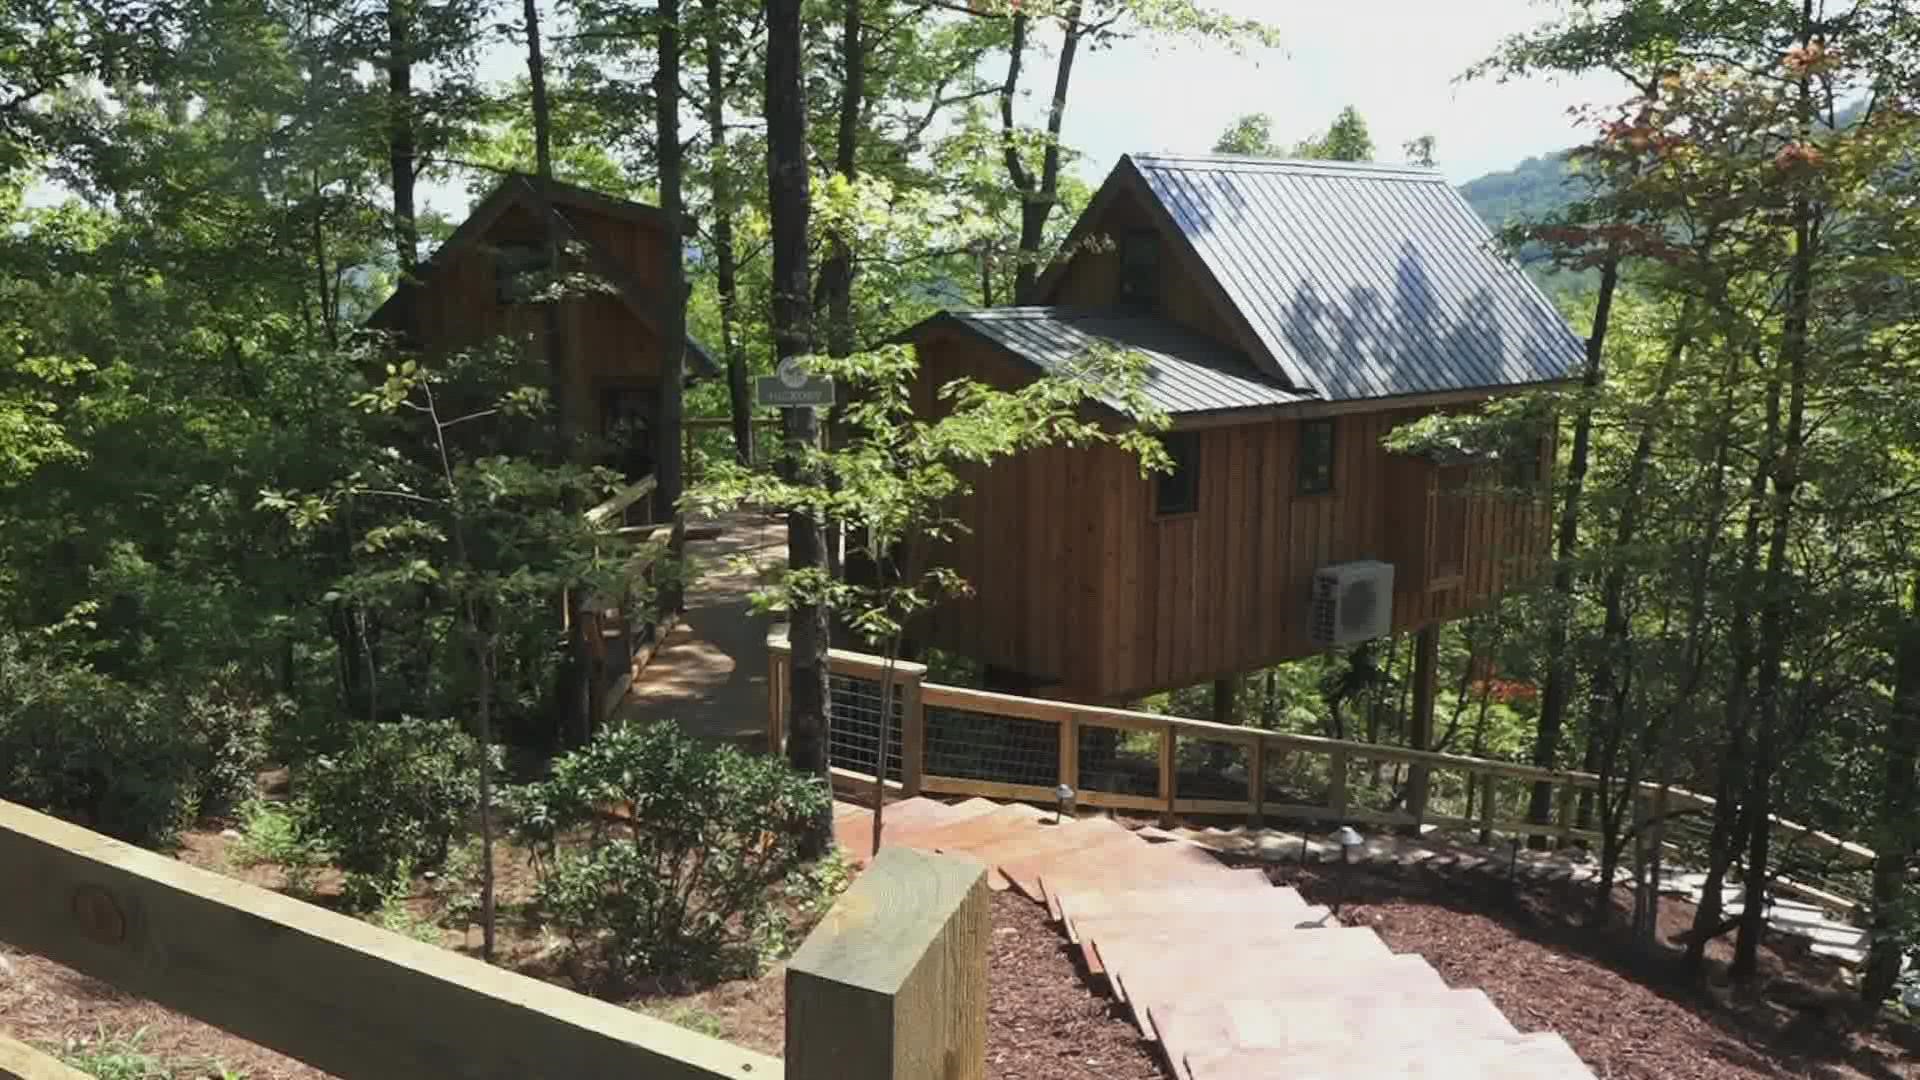 New luxury treehouses are taking the smokies by storm.